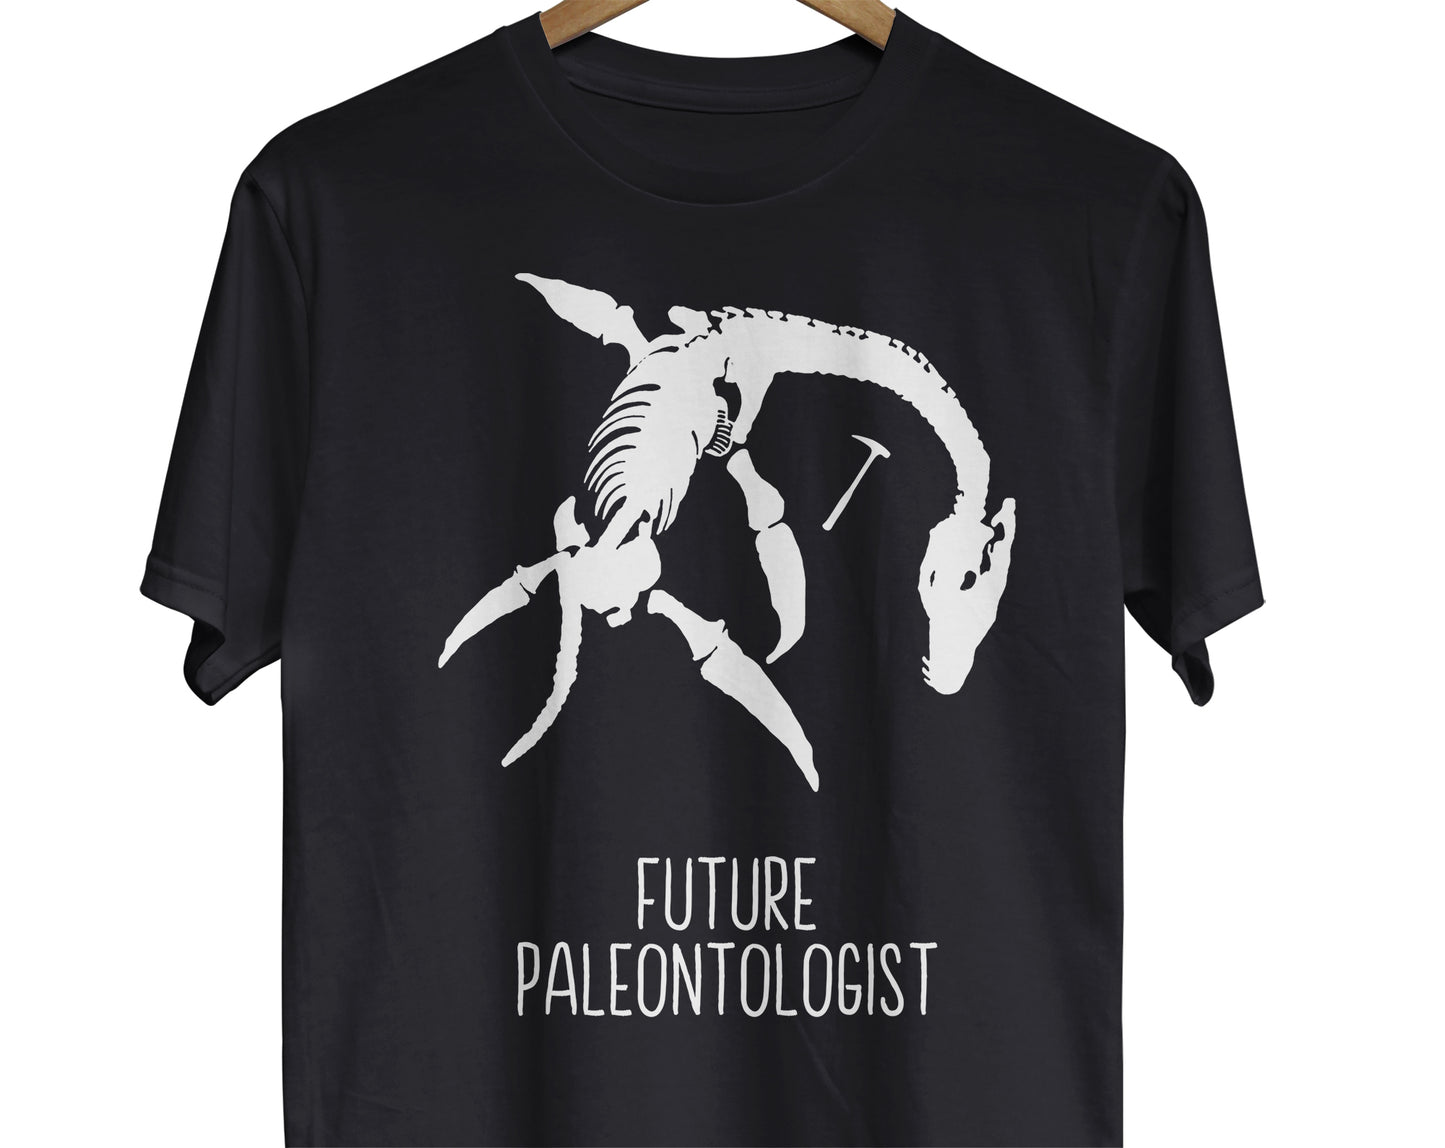 A science t-shirt for fossil lovers featuring a plesiosaur dinosaur skeleton and the text "Future Paleontologist"